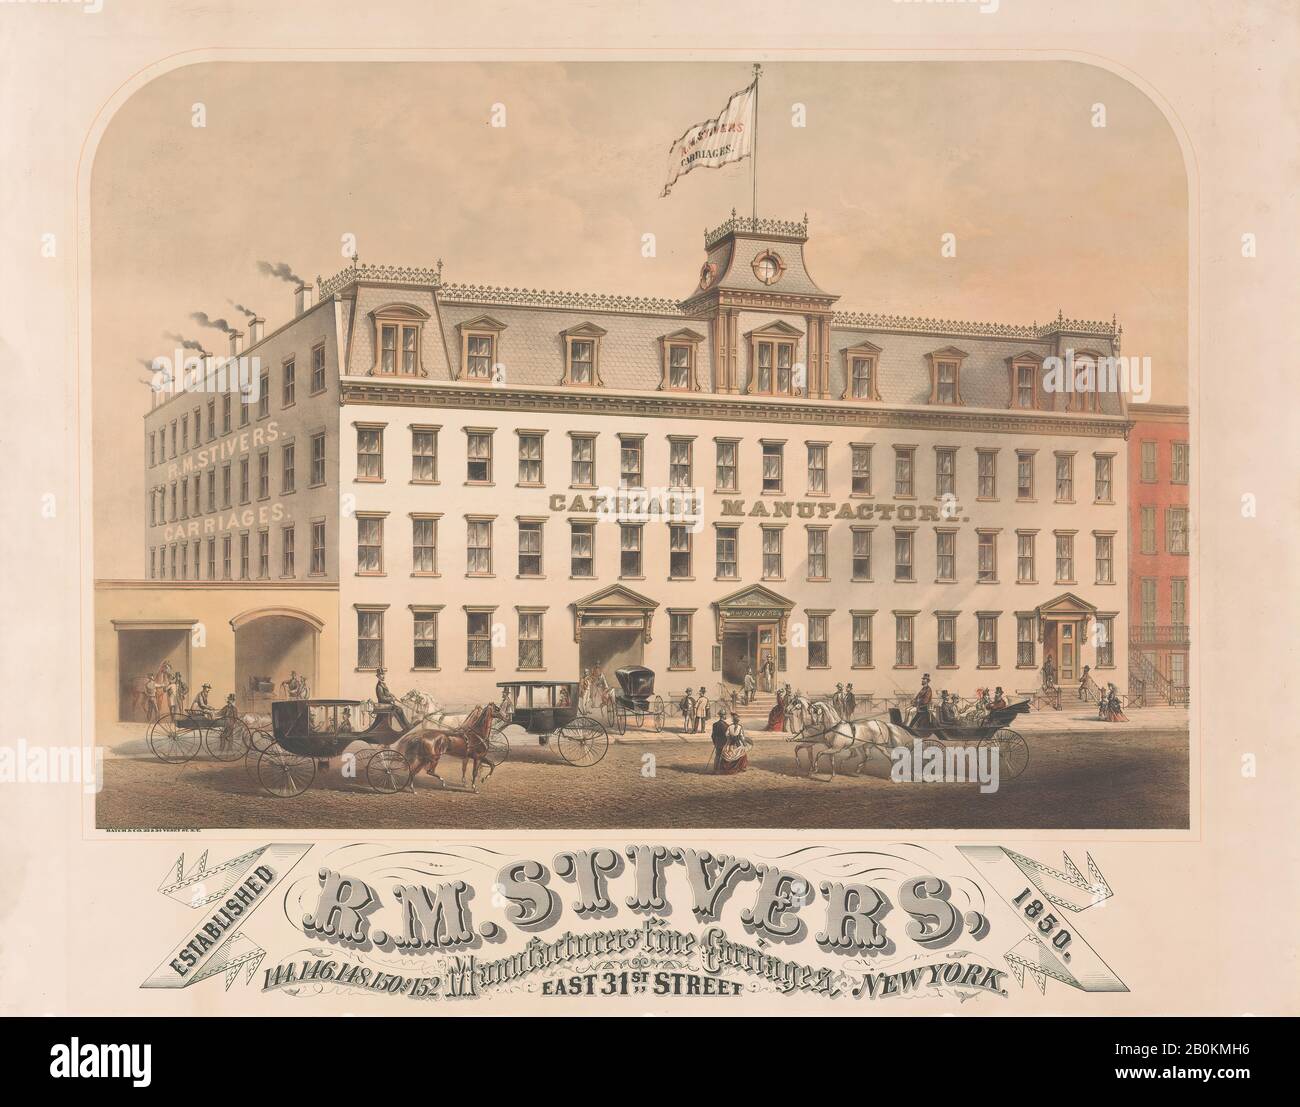 Hatch & Co., R. M. Stivers, Manufacturers of Fine Carriages, 146-152 East 31st Street, New York, 1872–73, Color lithograph, image: 18 1/16 x 25 9/16 in. (45.9 x 64.9 cm), sheet: 23 3/4 x 29 15/16 in. (60.4 x 76 cm), Prints Stock Photo